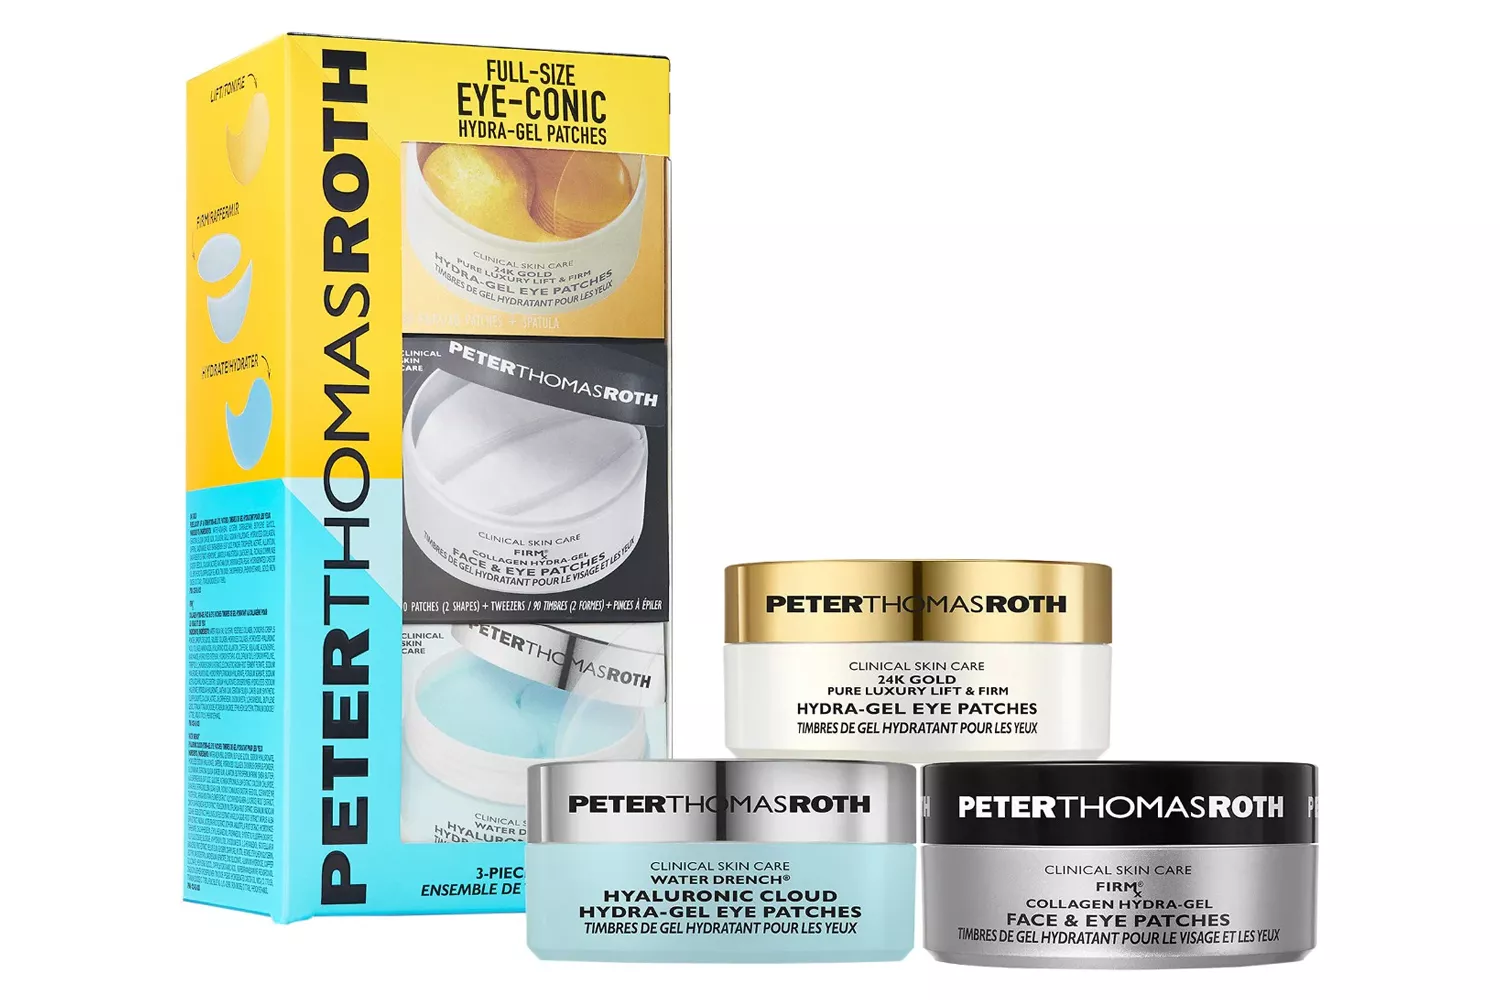 Peter Thomas Roth Eye-Conic Gel Patches